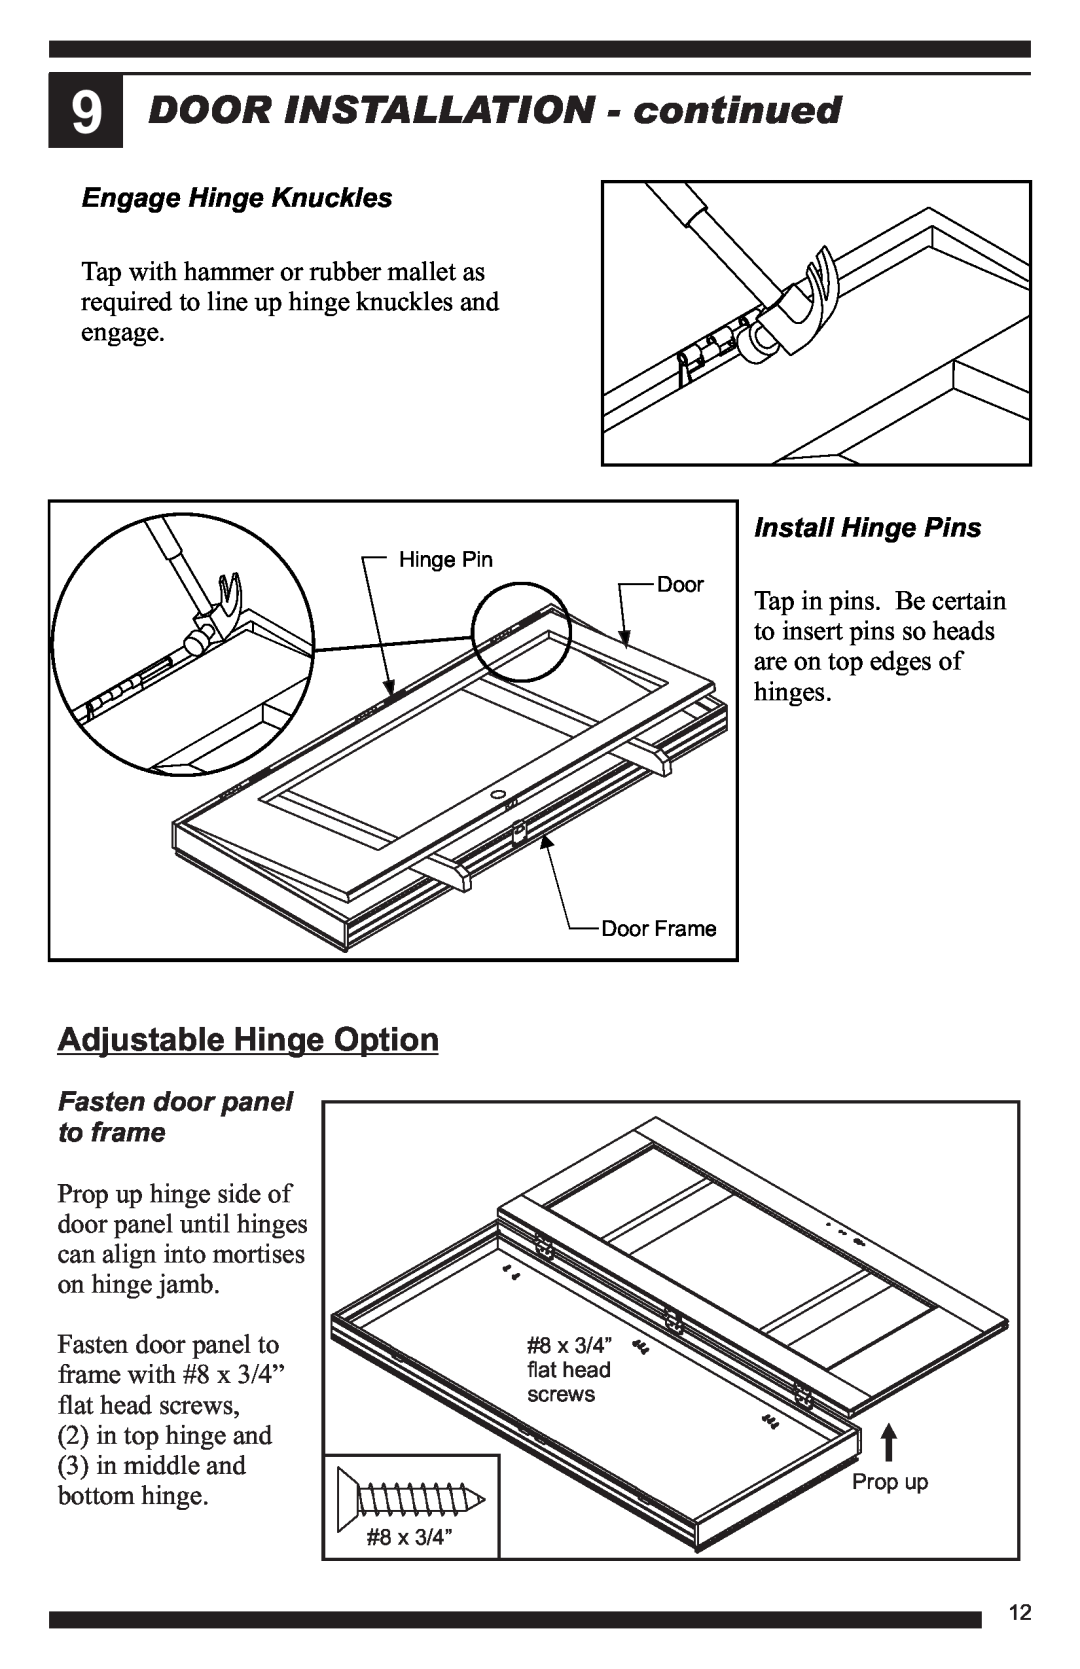 Therma-Tru Hinged Patio Door System Single Panel Assembly Unit DOOR INSTALLATION - continued, Adjustable Hinge Option 